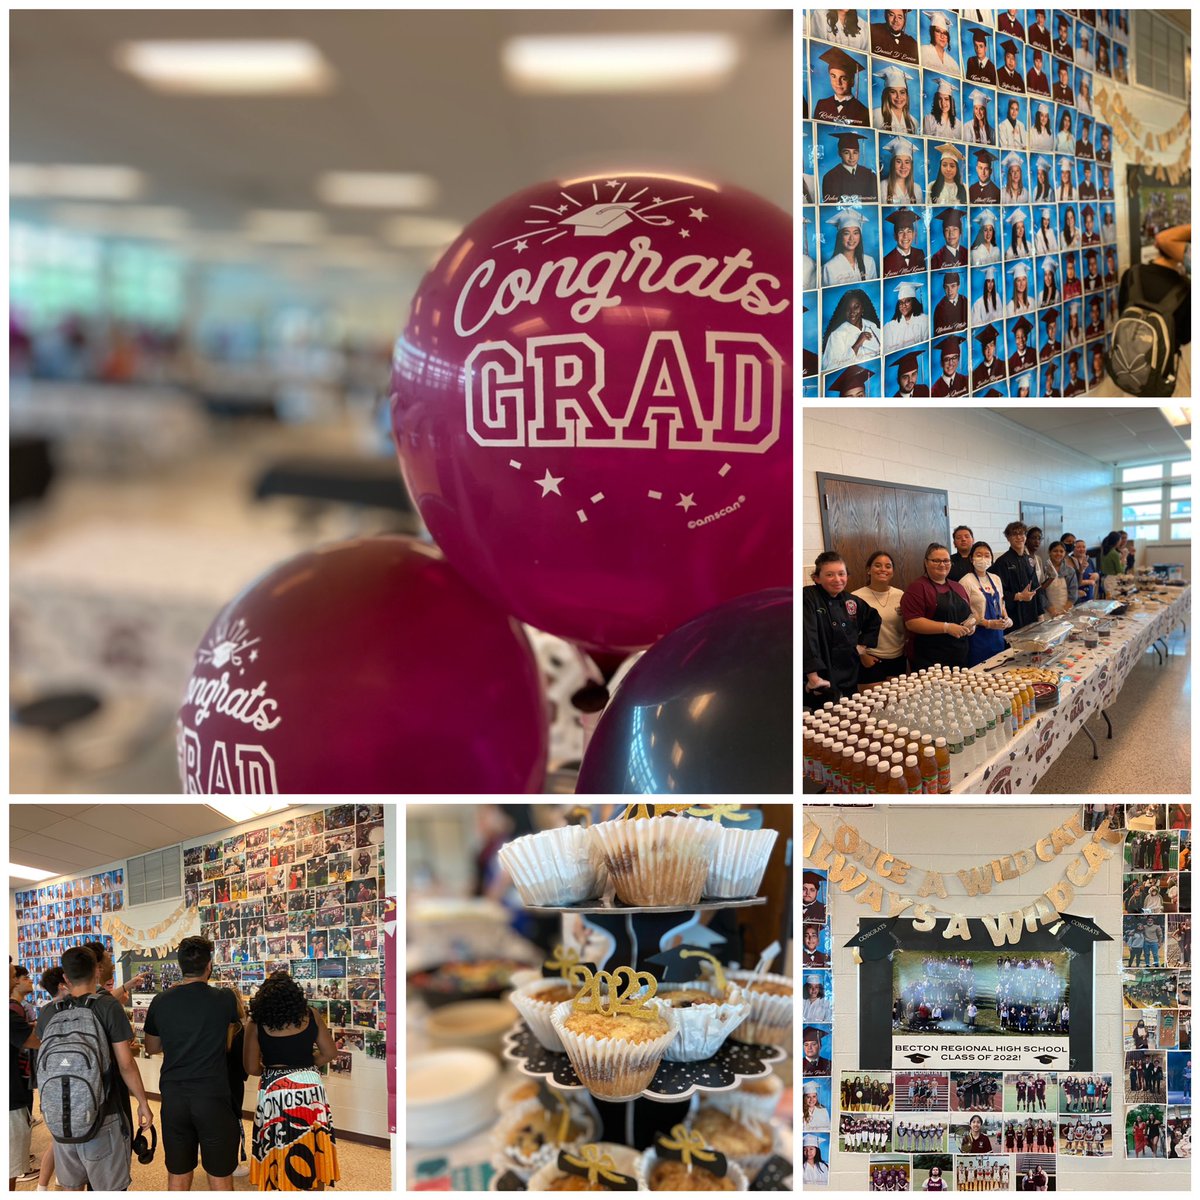 Class of 2022 senior breakfast! Bittersweet moment as we continue to celebrate our seniors and prepare them for their big milestone Graduation 👨‍🎓 👩‍🎓 Day this Friday! #OnceAWildcatAlwaysAWildcat 

Shout out to @Chef_Becton & Culinary Club for a delicious breakfast 🍳.